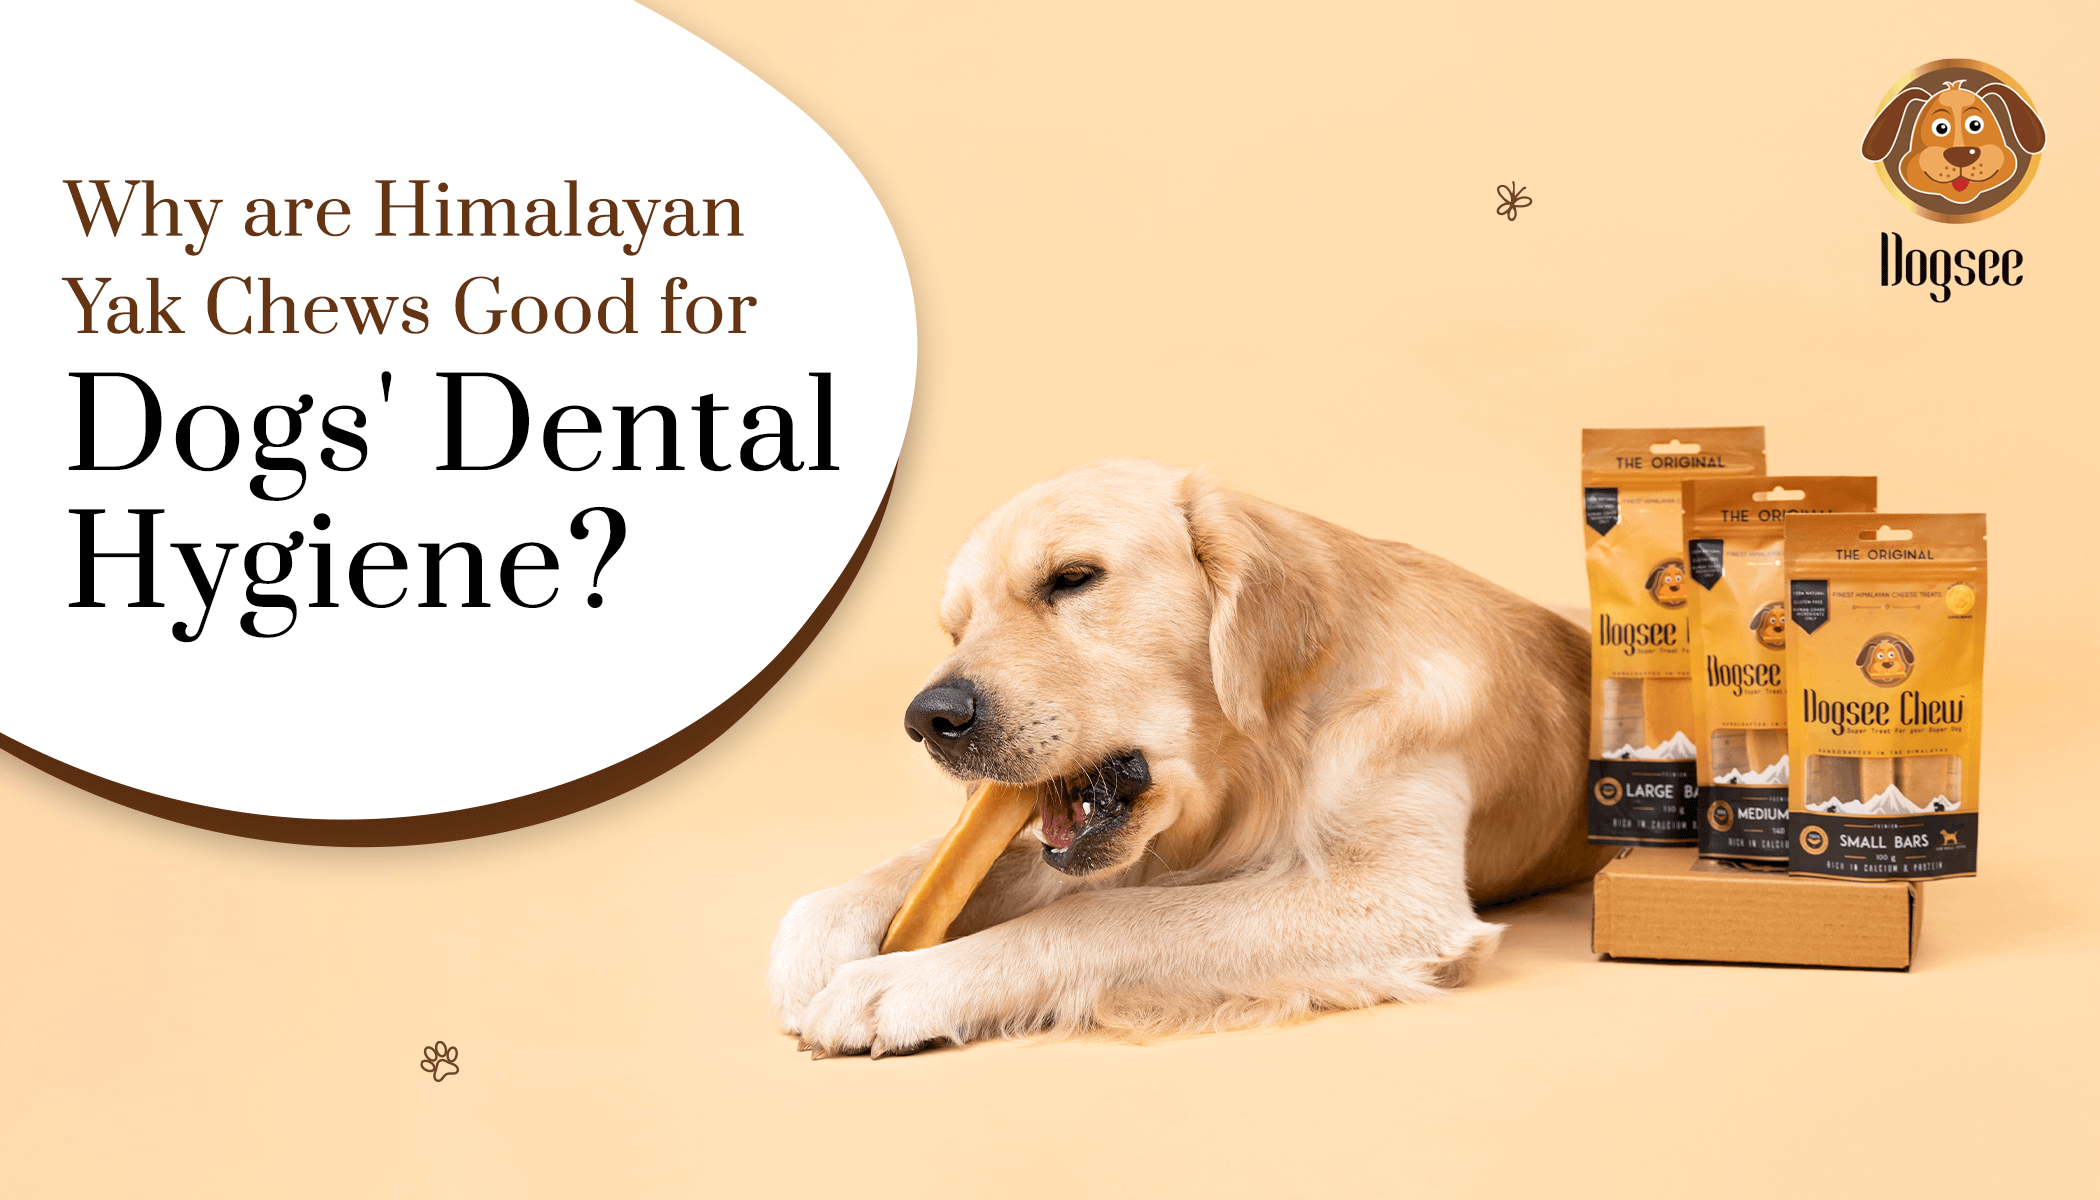 Why are Himalayan yak chews good for Dogs Dental Hygiene?